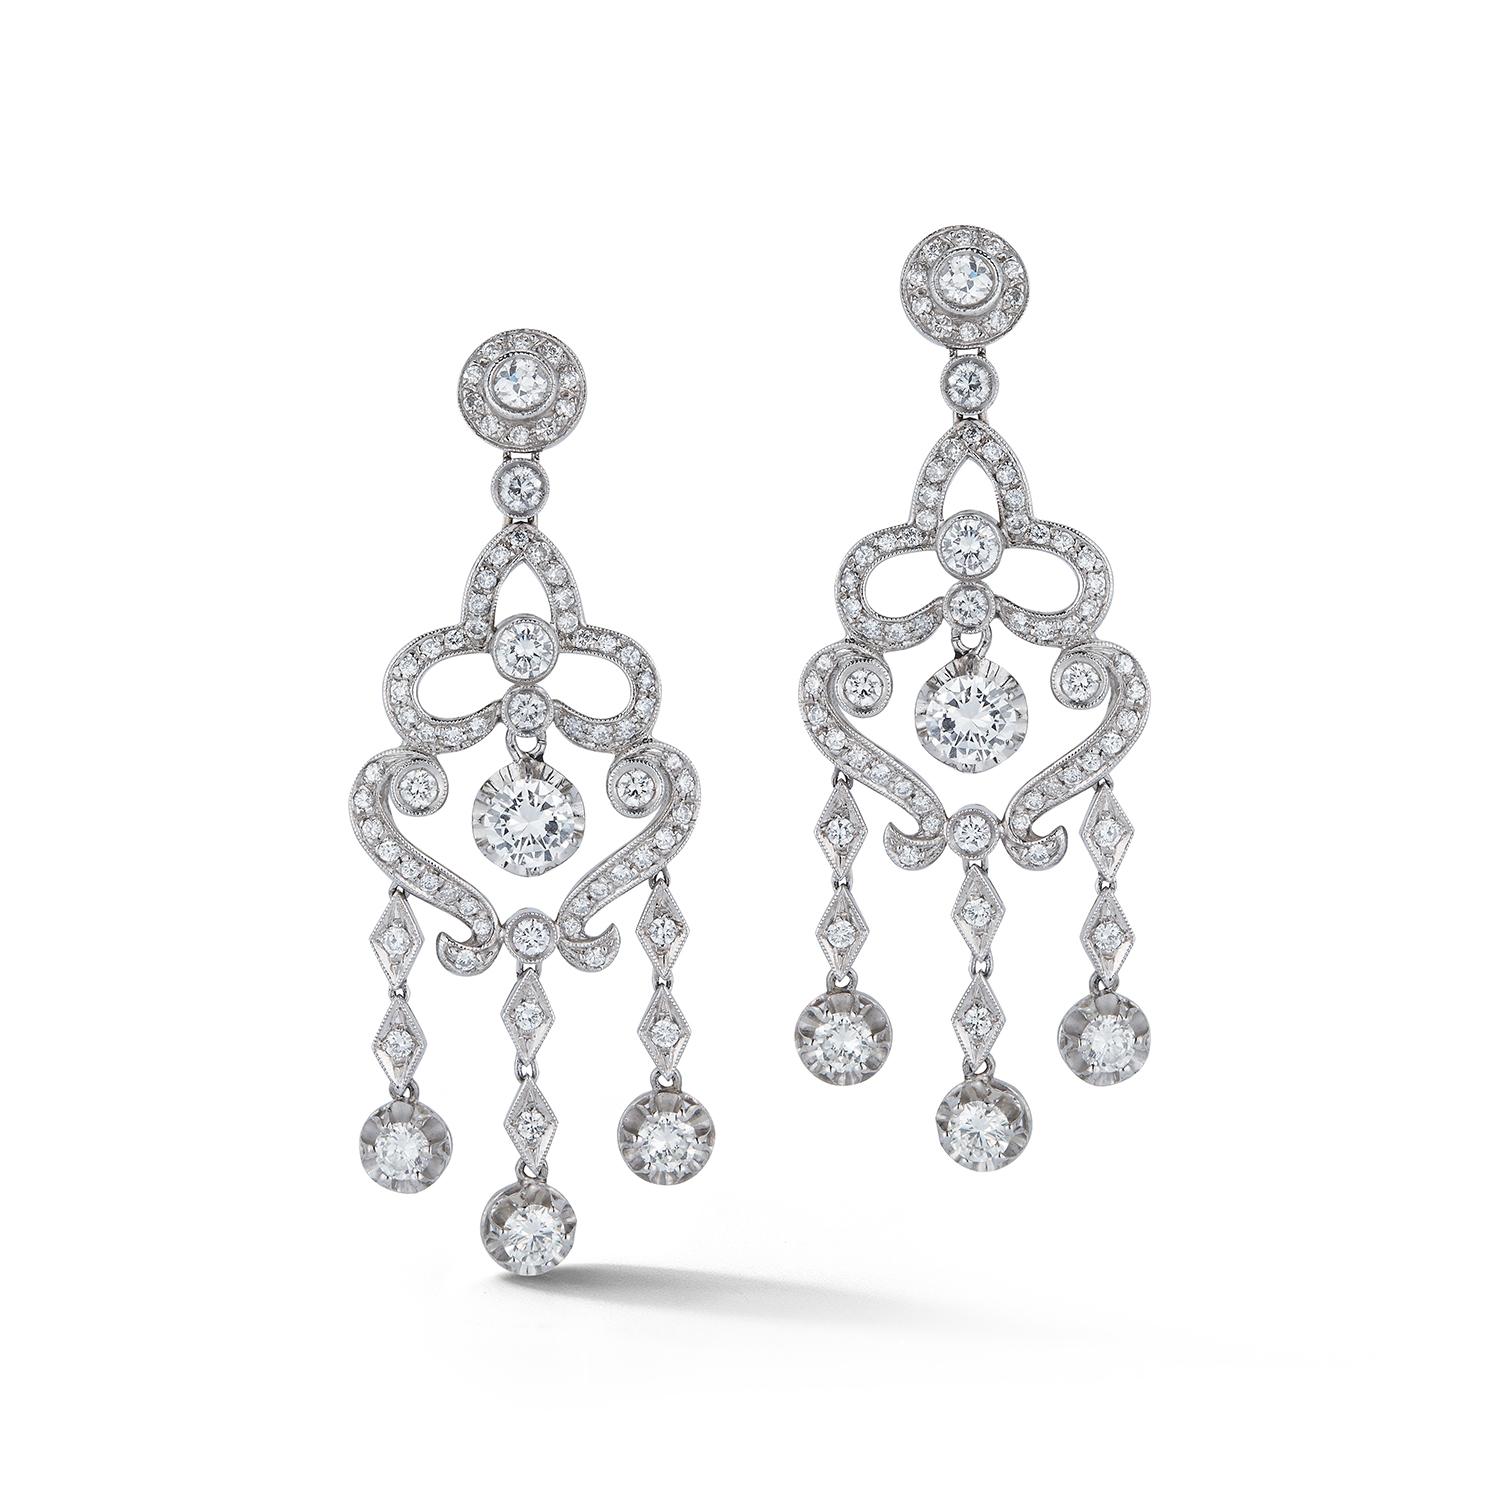 Diamond Chandelier earring with 2 center brilliant round cut diamonds  approximately 1.00 ct and 142 brilliant diamonds approximately 3.93 ct 
Measurements: 2.25